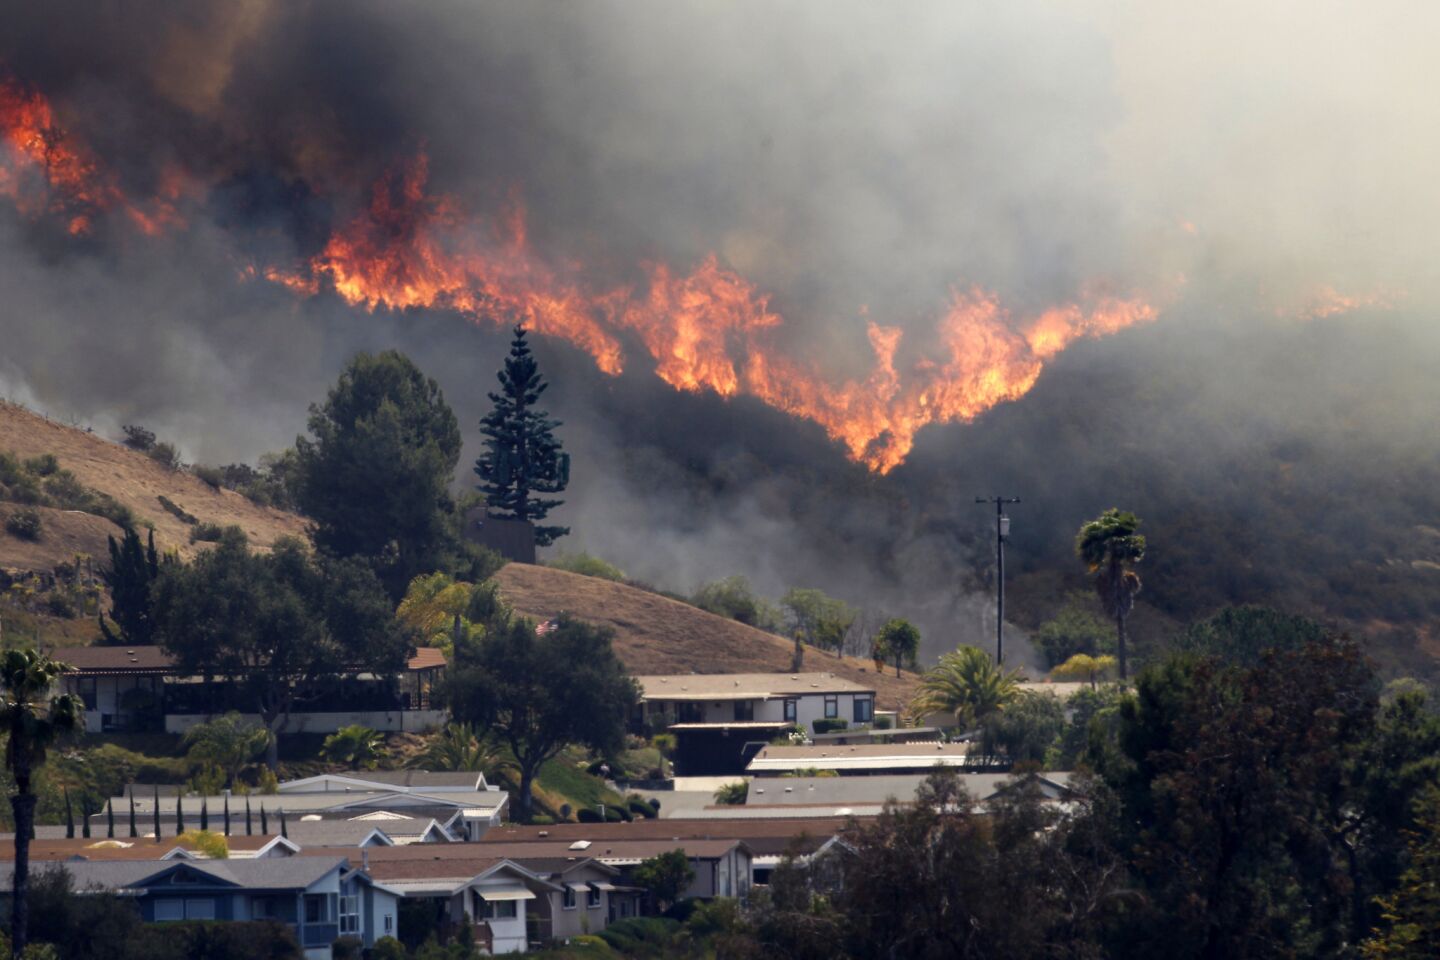 A wildfire burns out of control in the Deer Springs area east of Fallbrook.